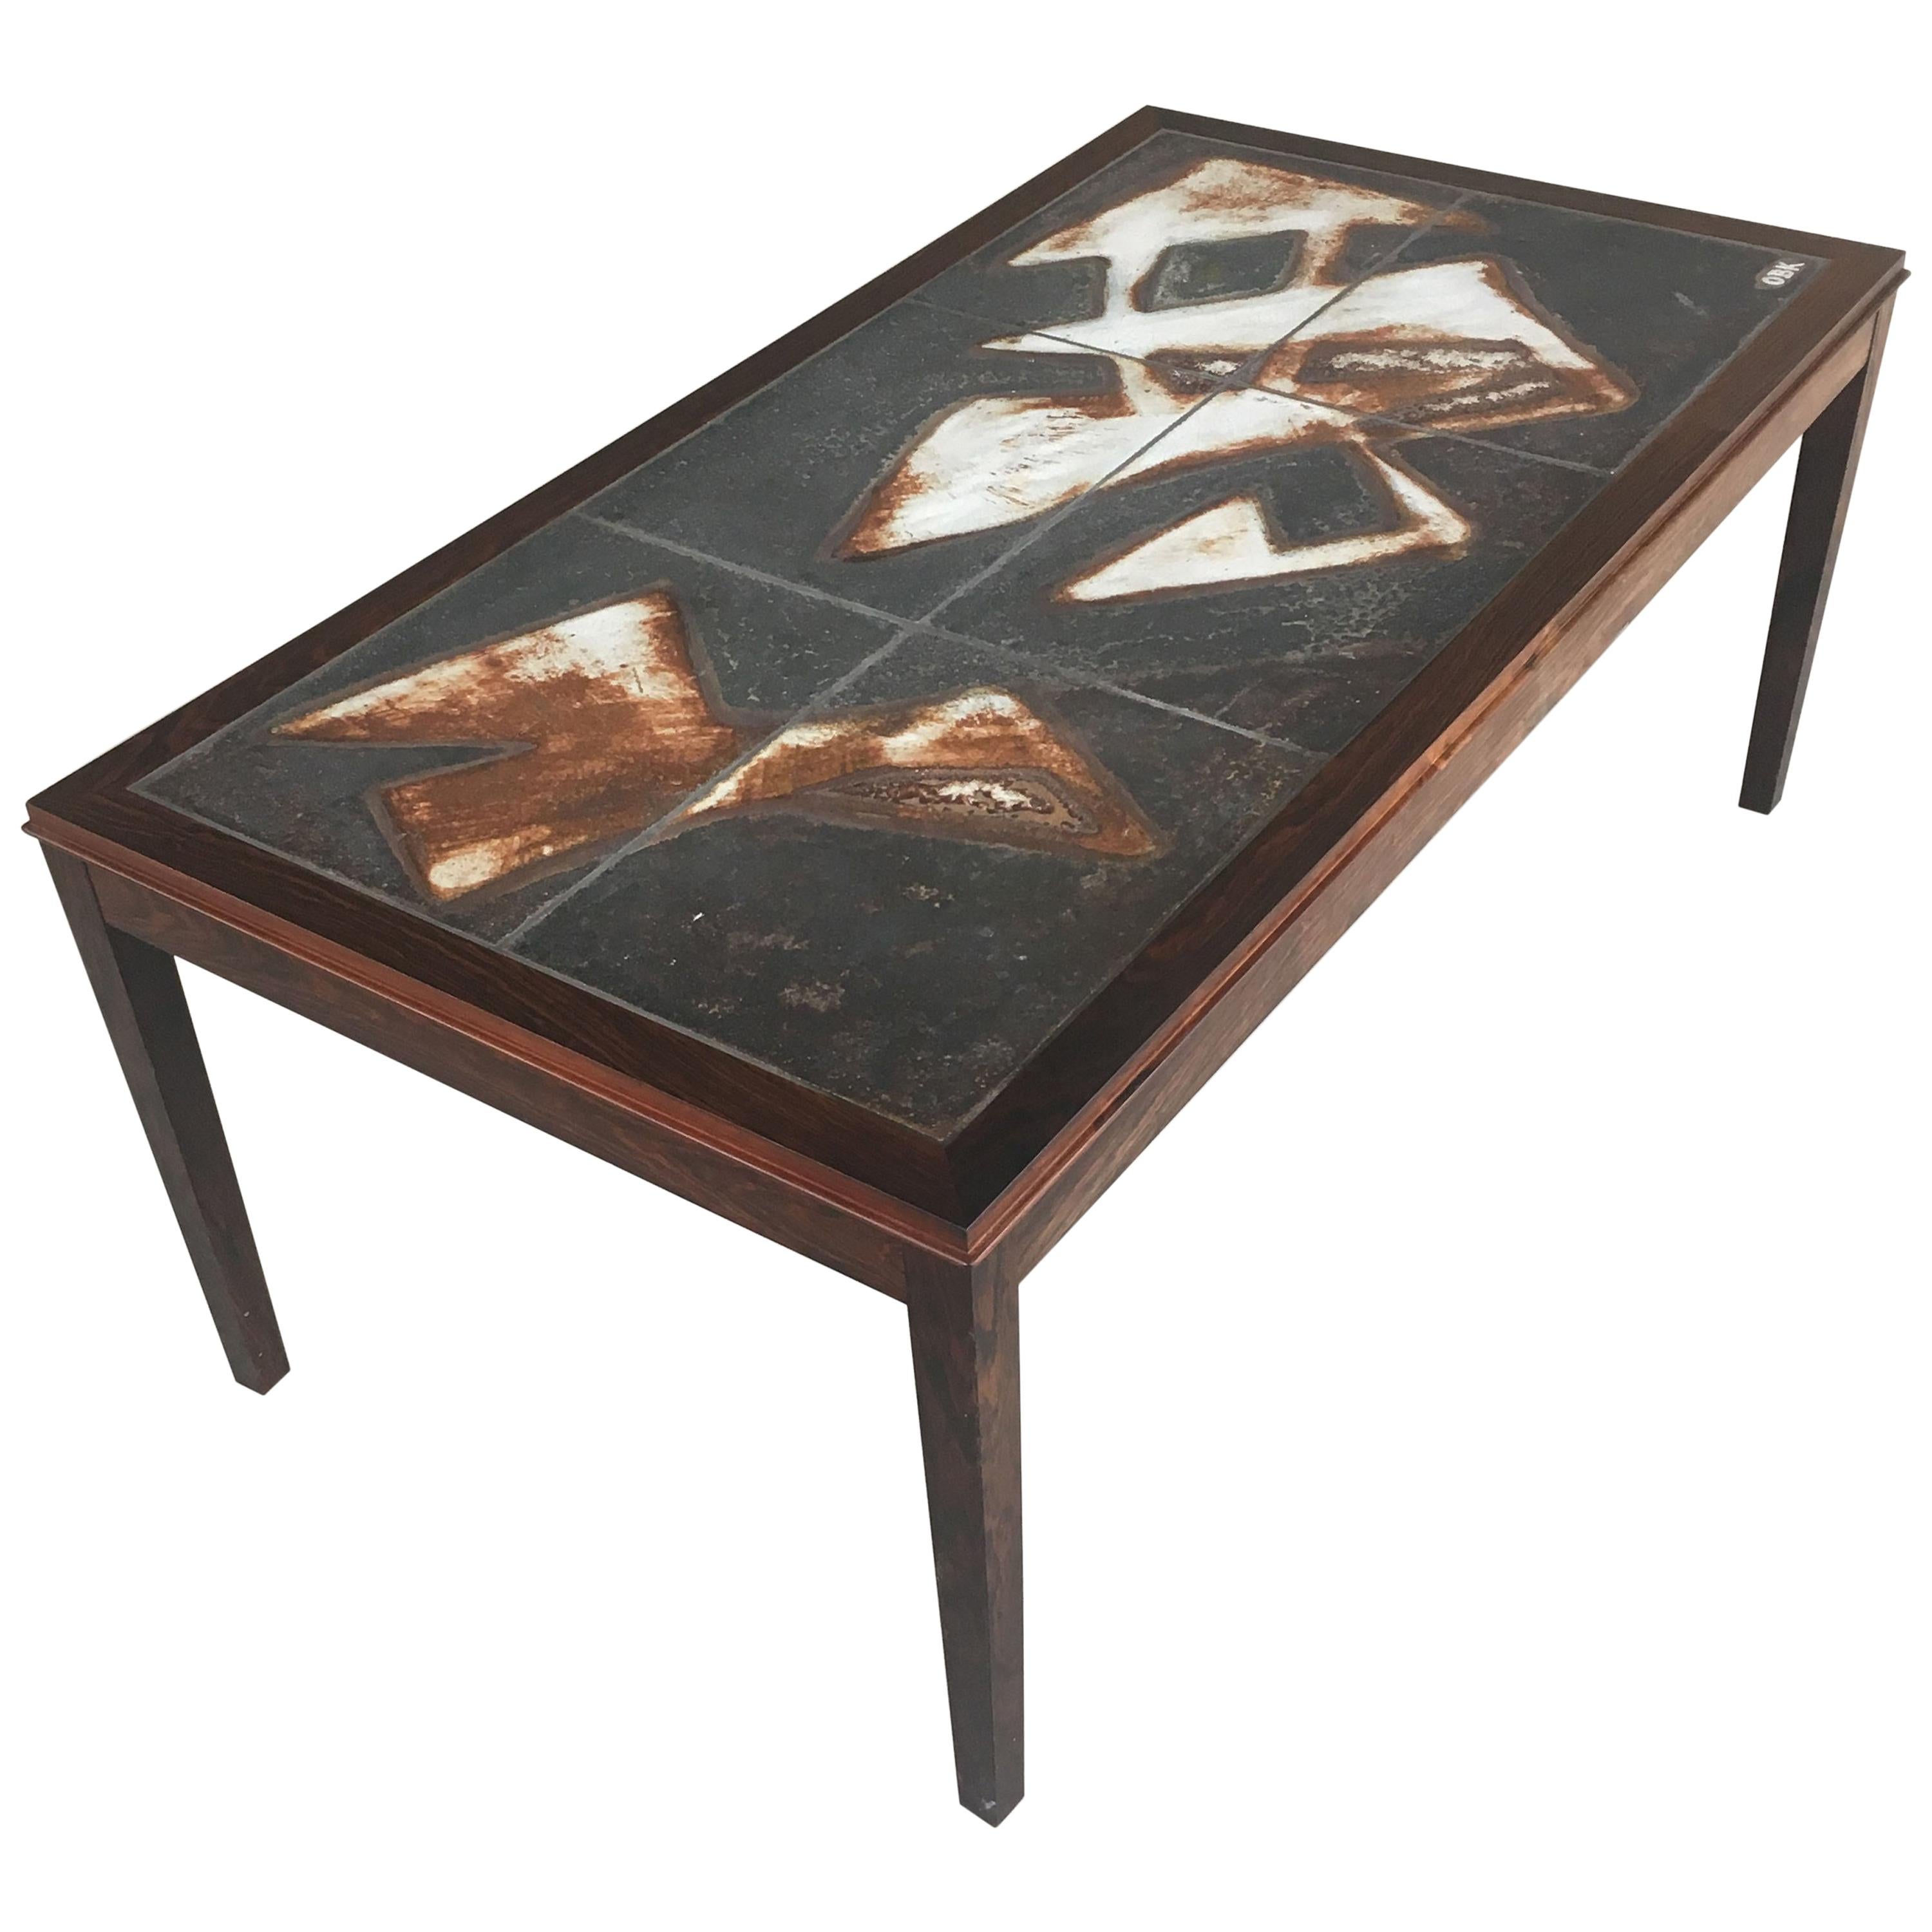 1960s Ole Bjorn Krüger Fully Restored Tile Topped Coffee Table in Rosewood